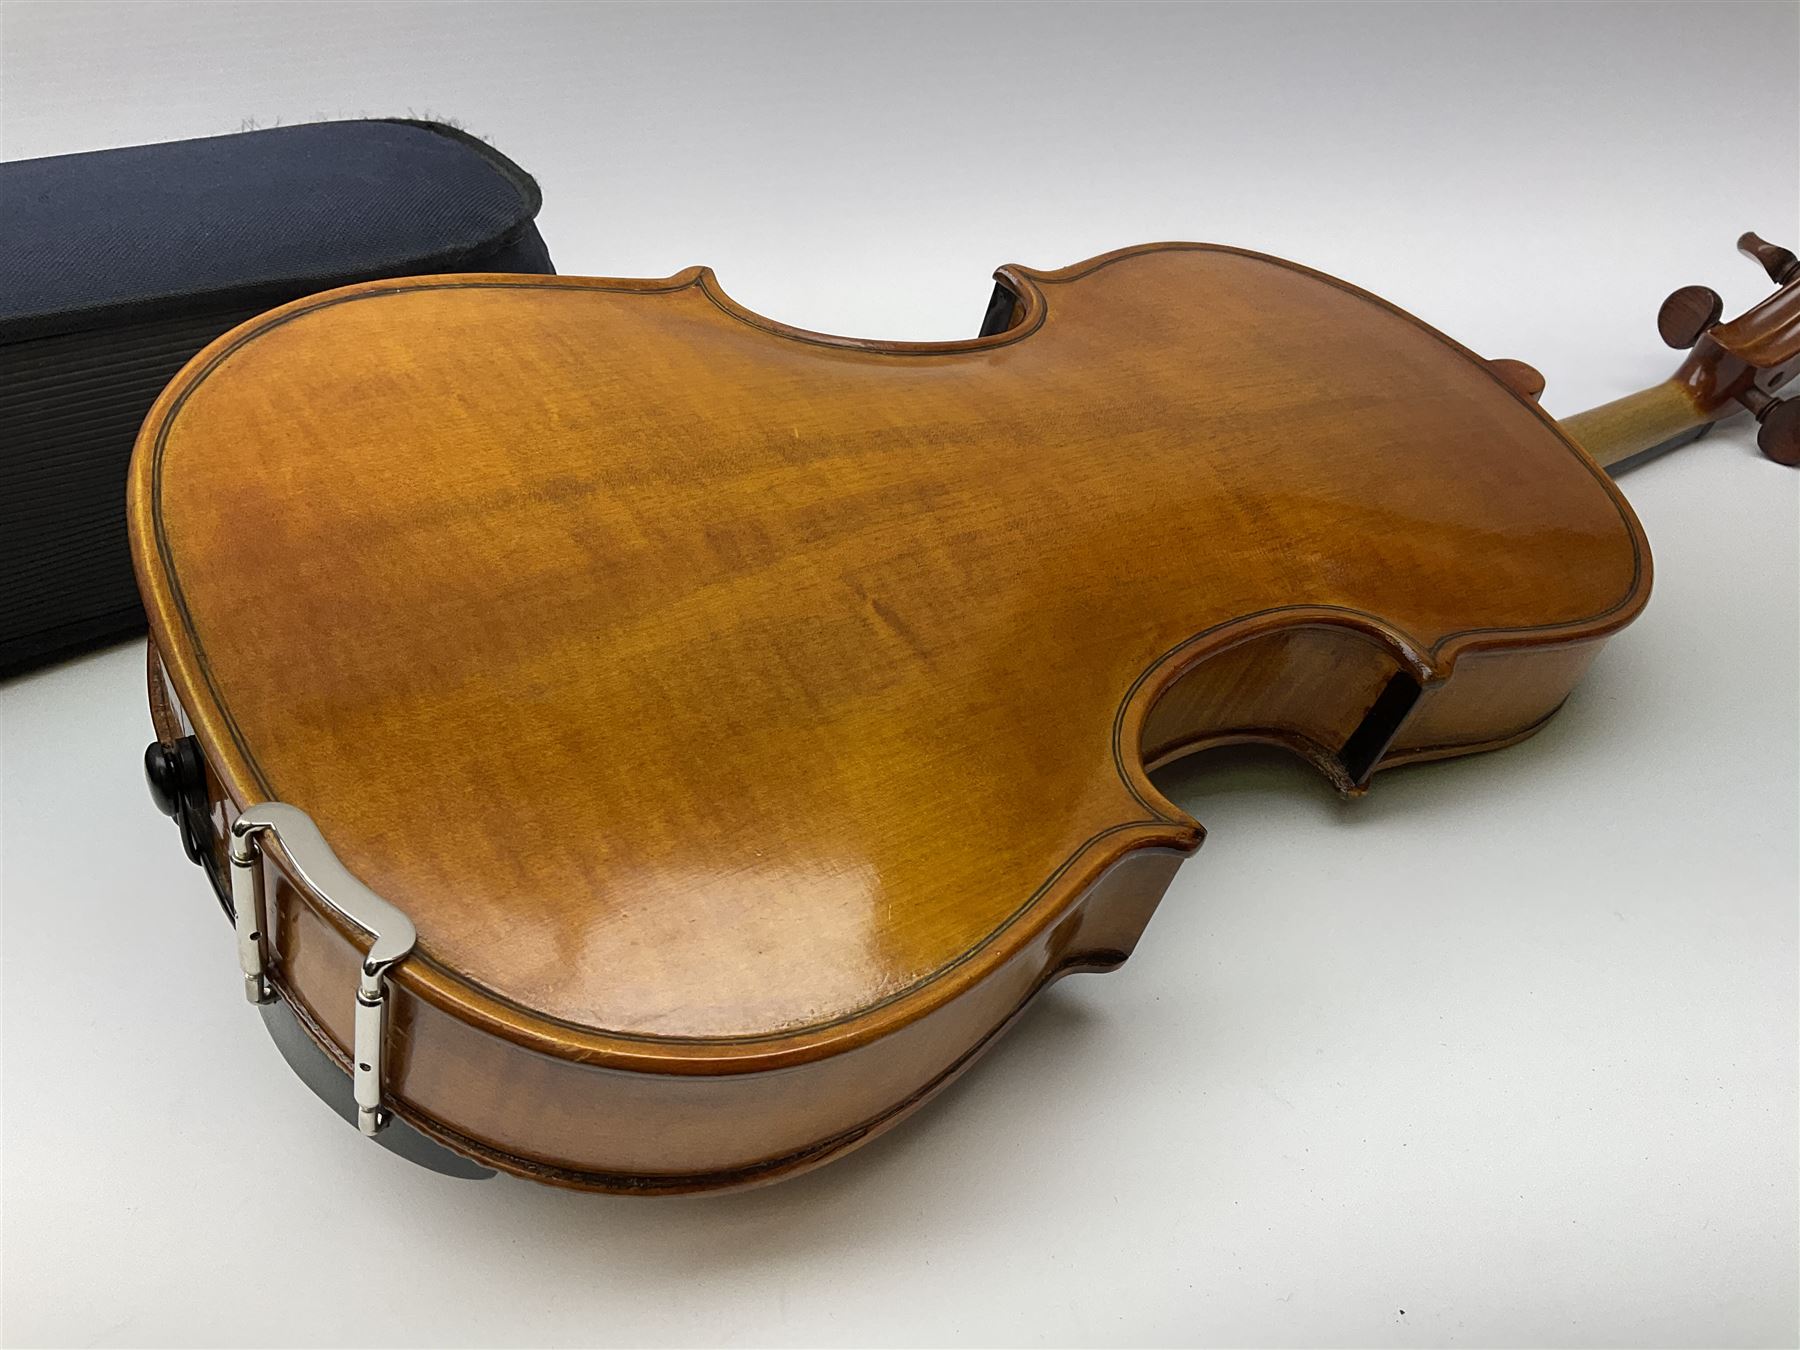 1920s continental large viola with 42cm two-piece maple back and ribs and wide grain sprucewood top - Image 17 of 21